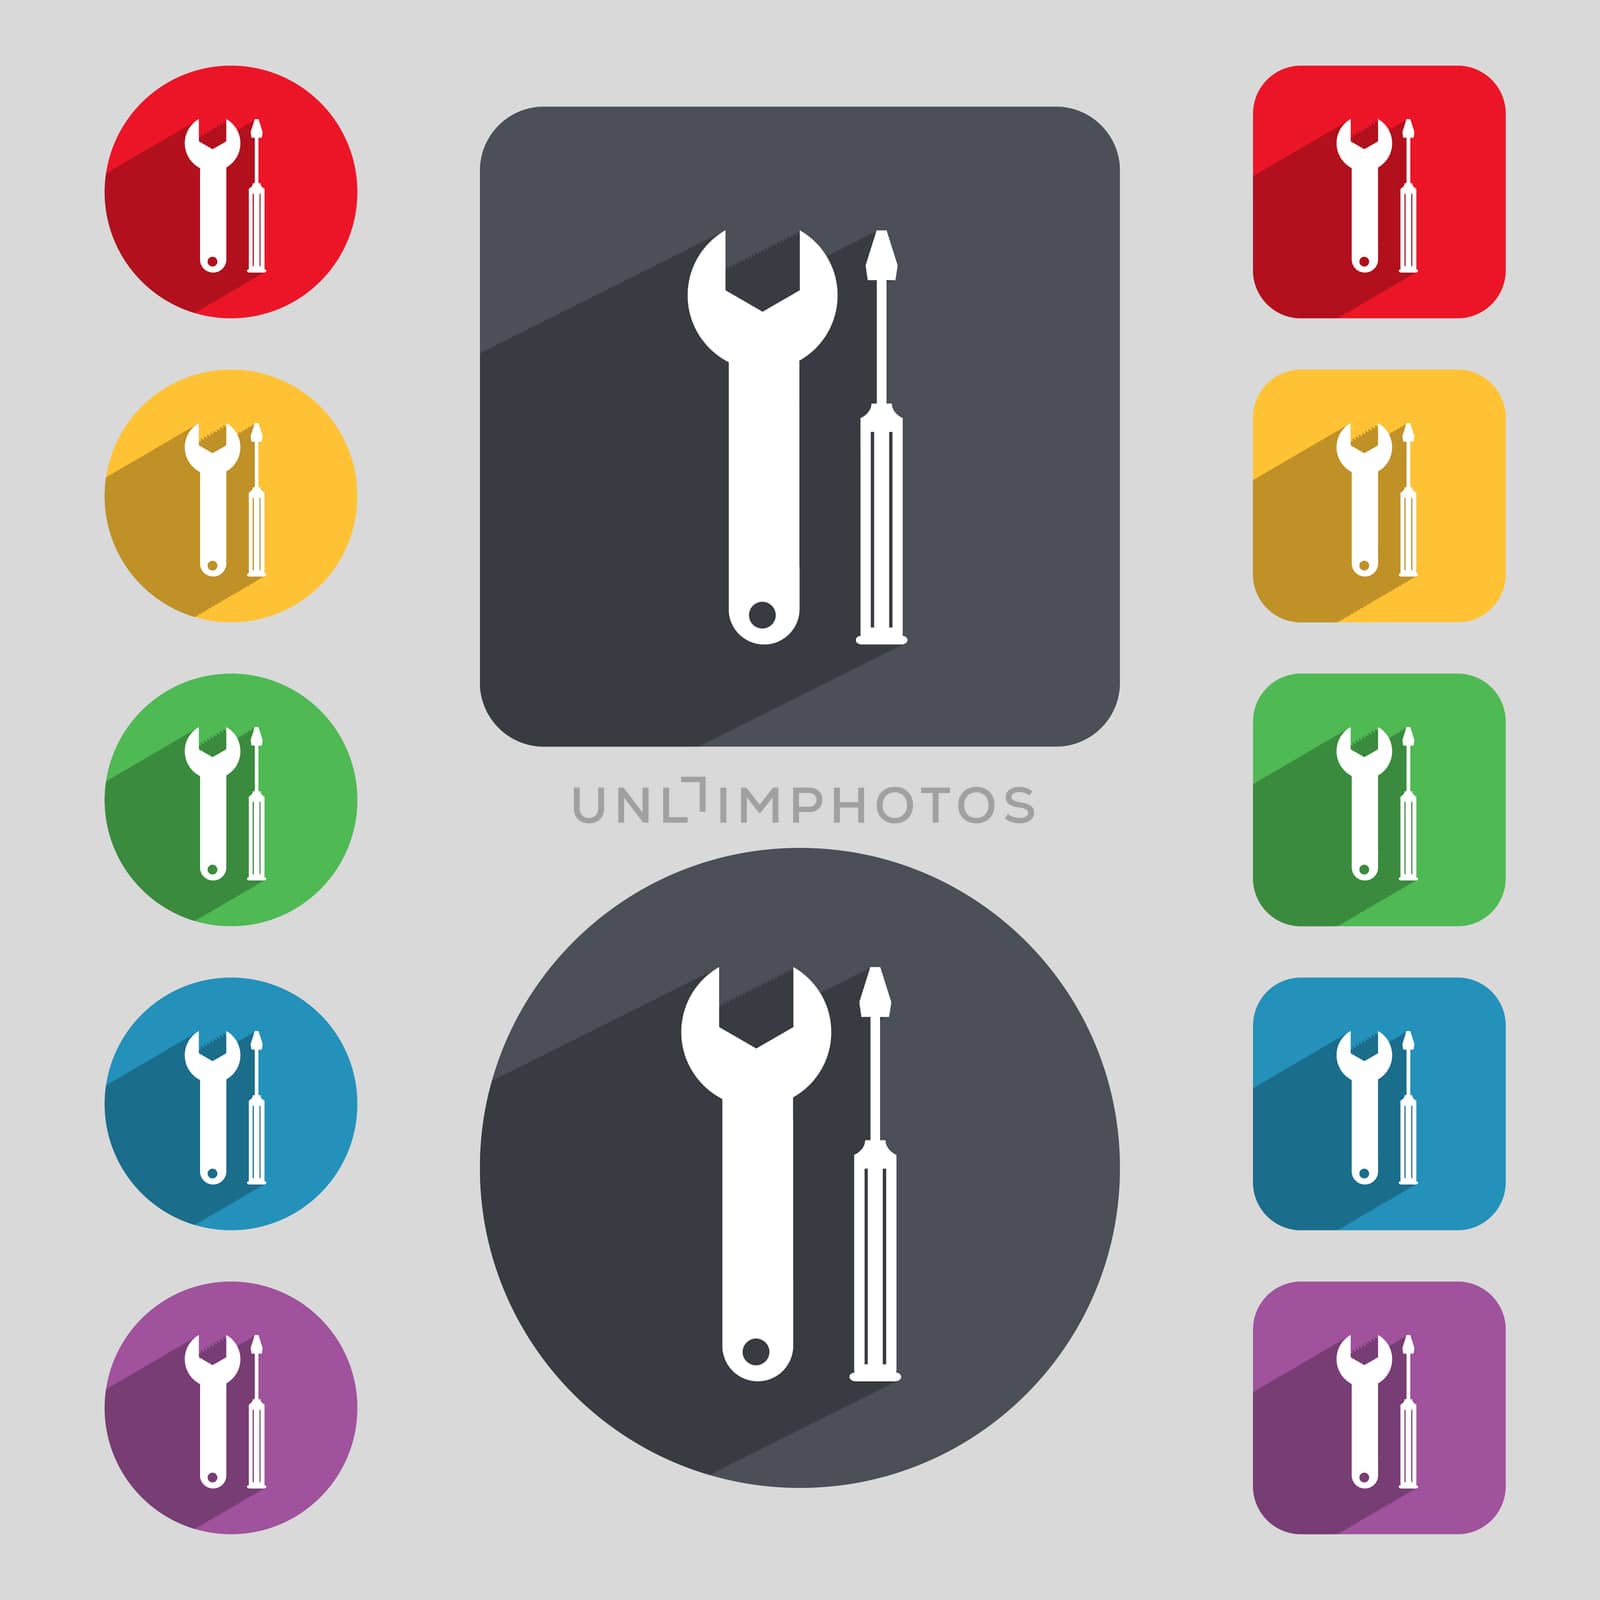 Repair tool sign icon. Service symbol. screwdriver with wrench. Set of colored buttons. illustration